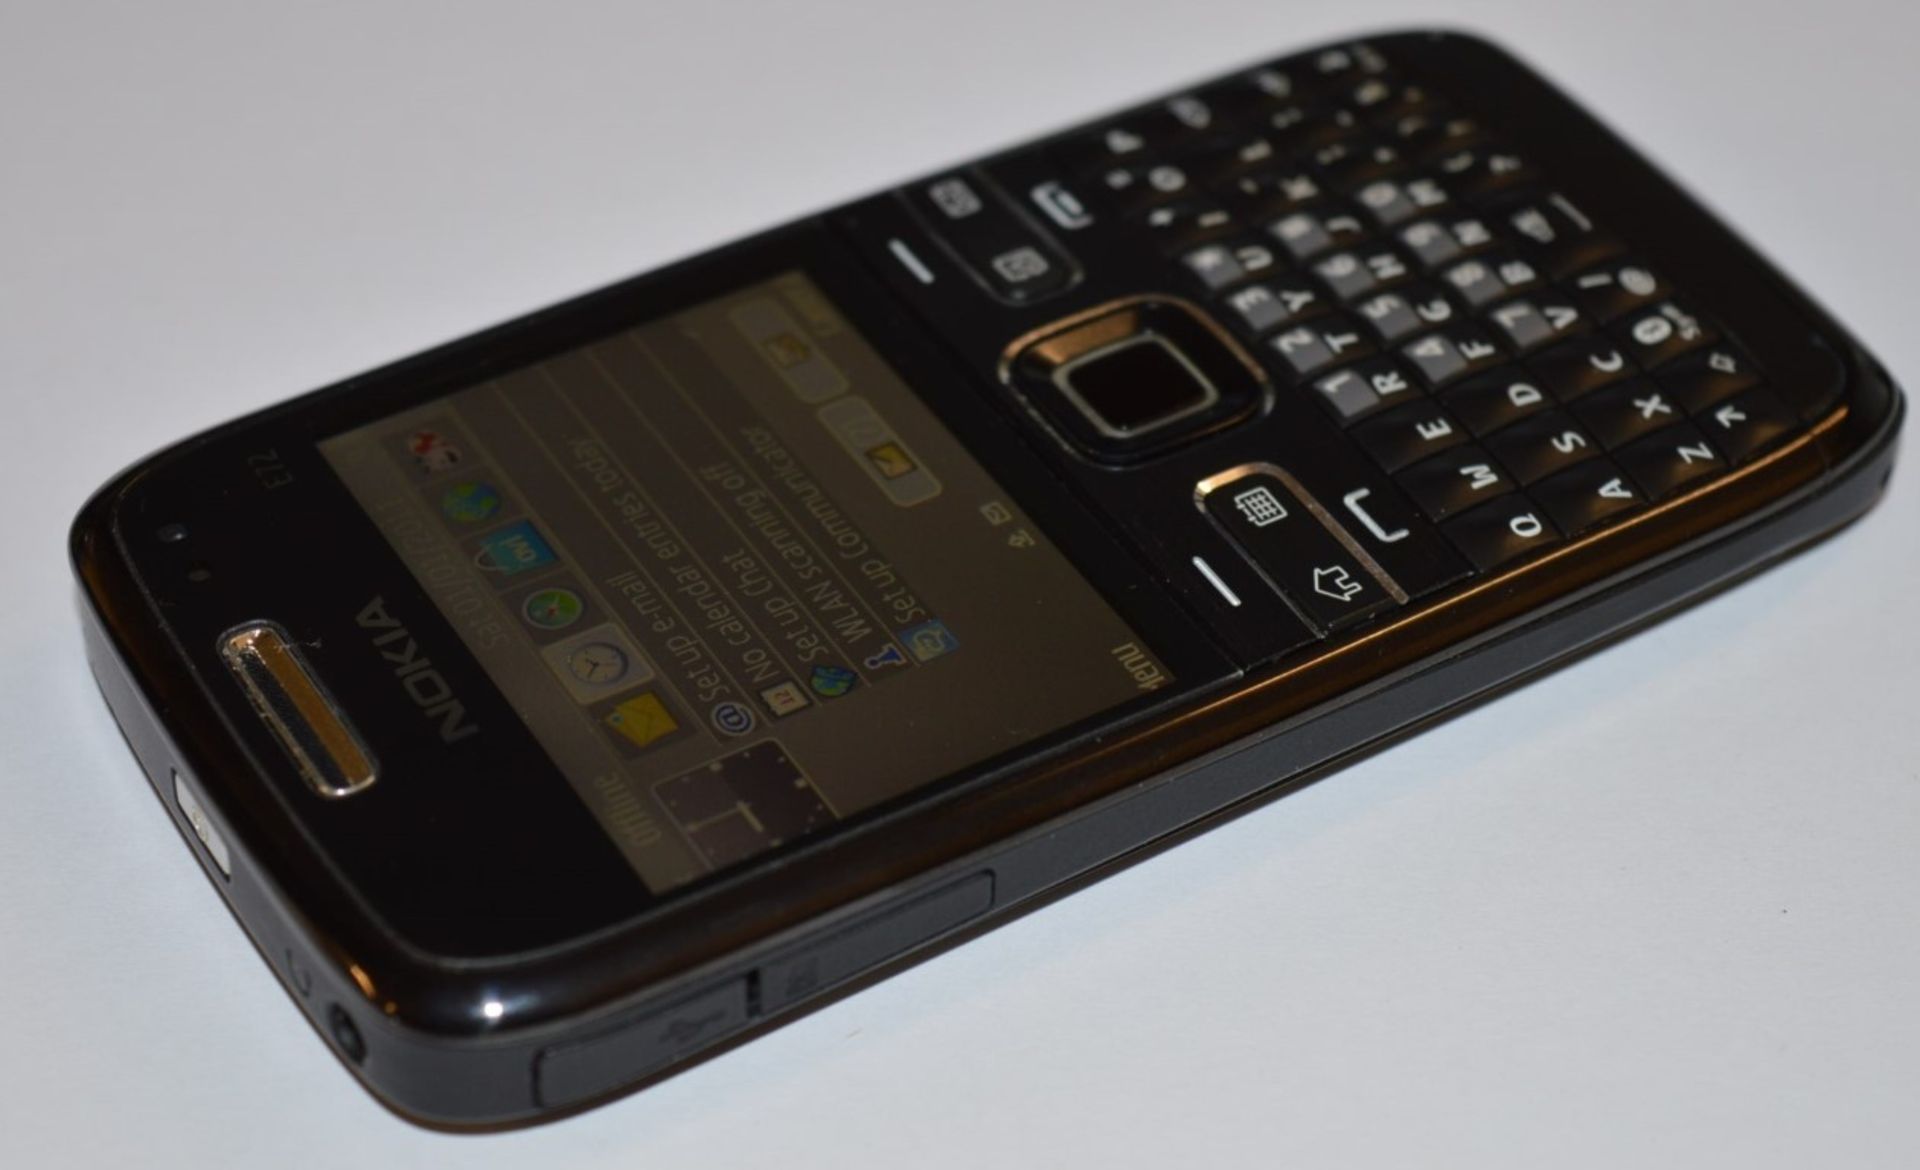 1 x Nokia E72 Mobile Phone Handset With Charger - Features Qwerty Keyboard, 600mhz CPU, 250mb Storag - Image 3 of 6